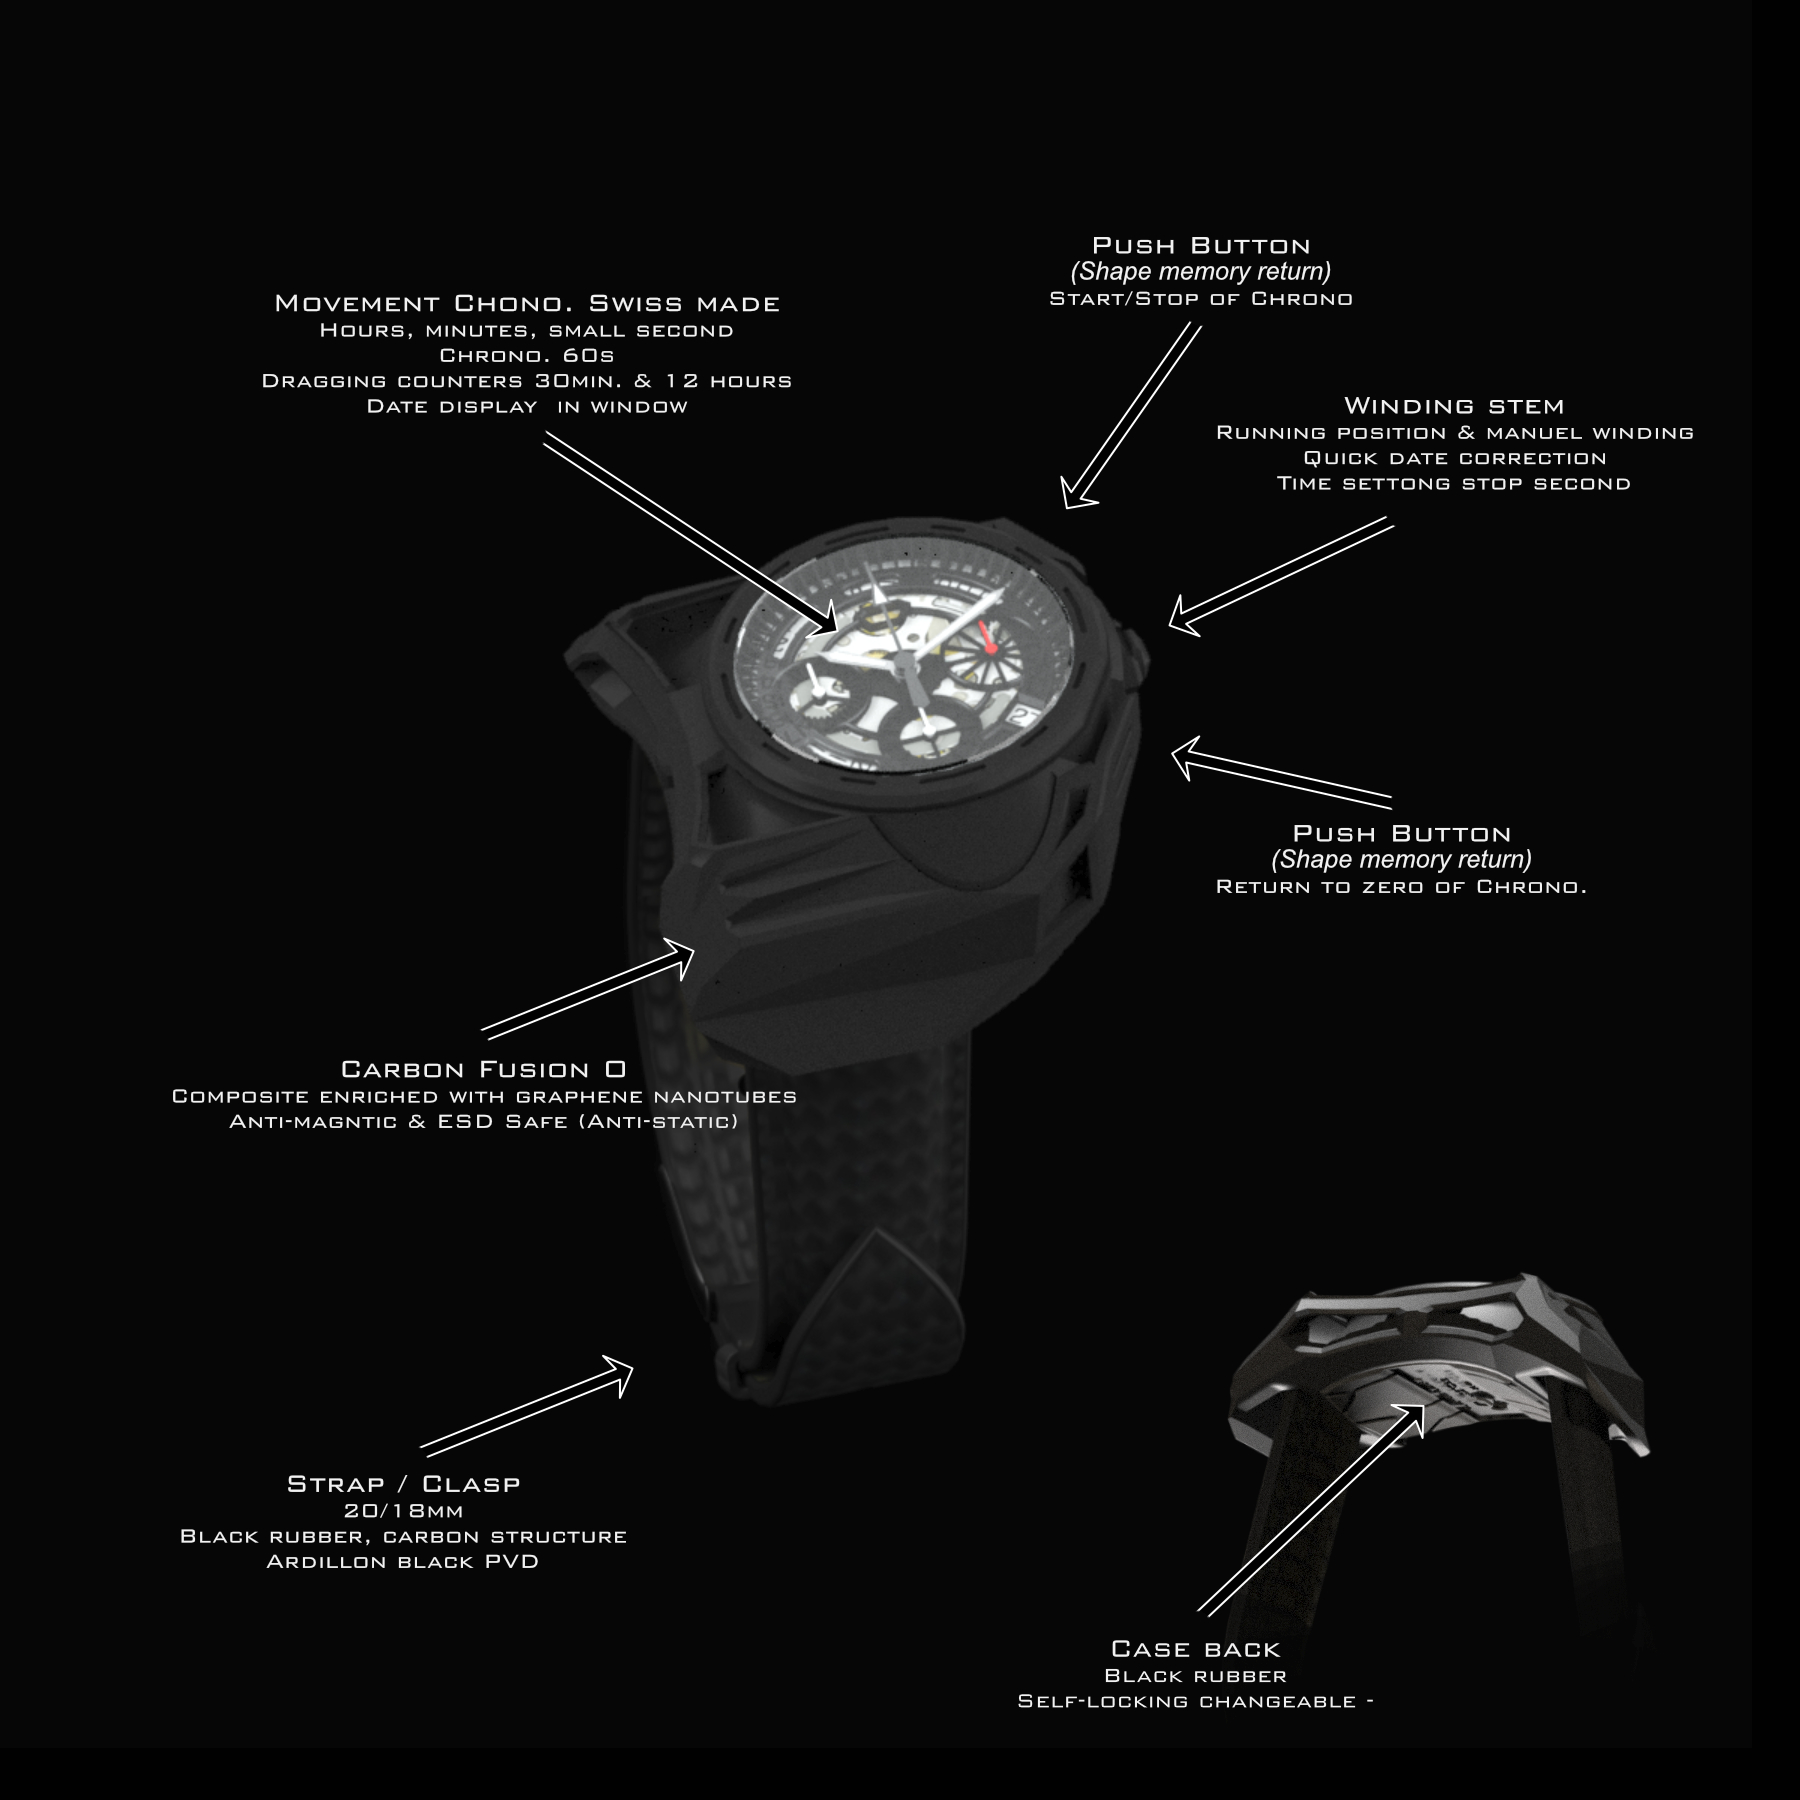 Pilot 1 Chronograph IMG specifications